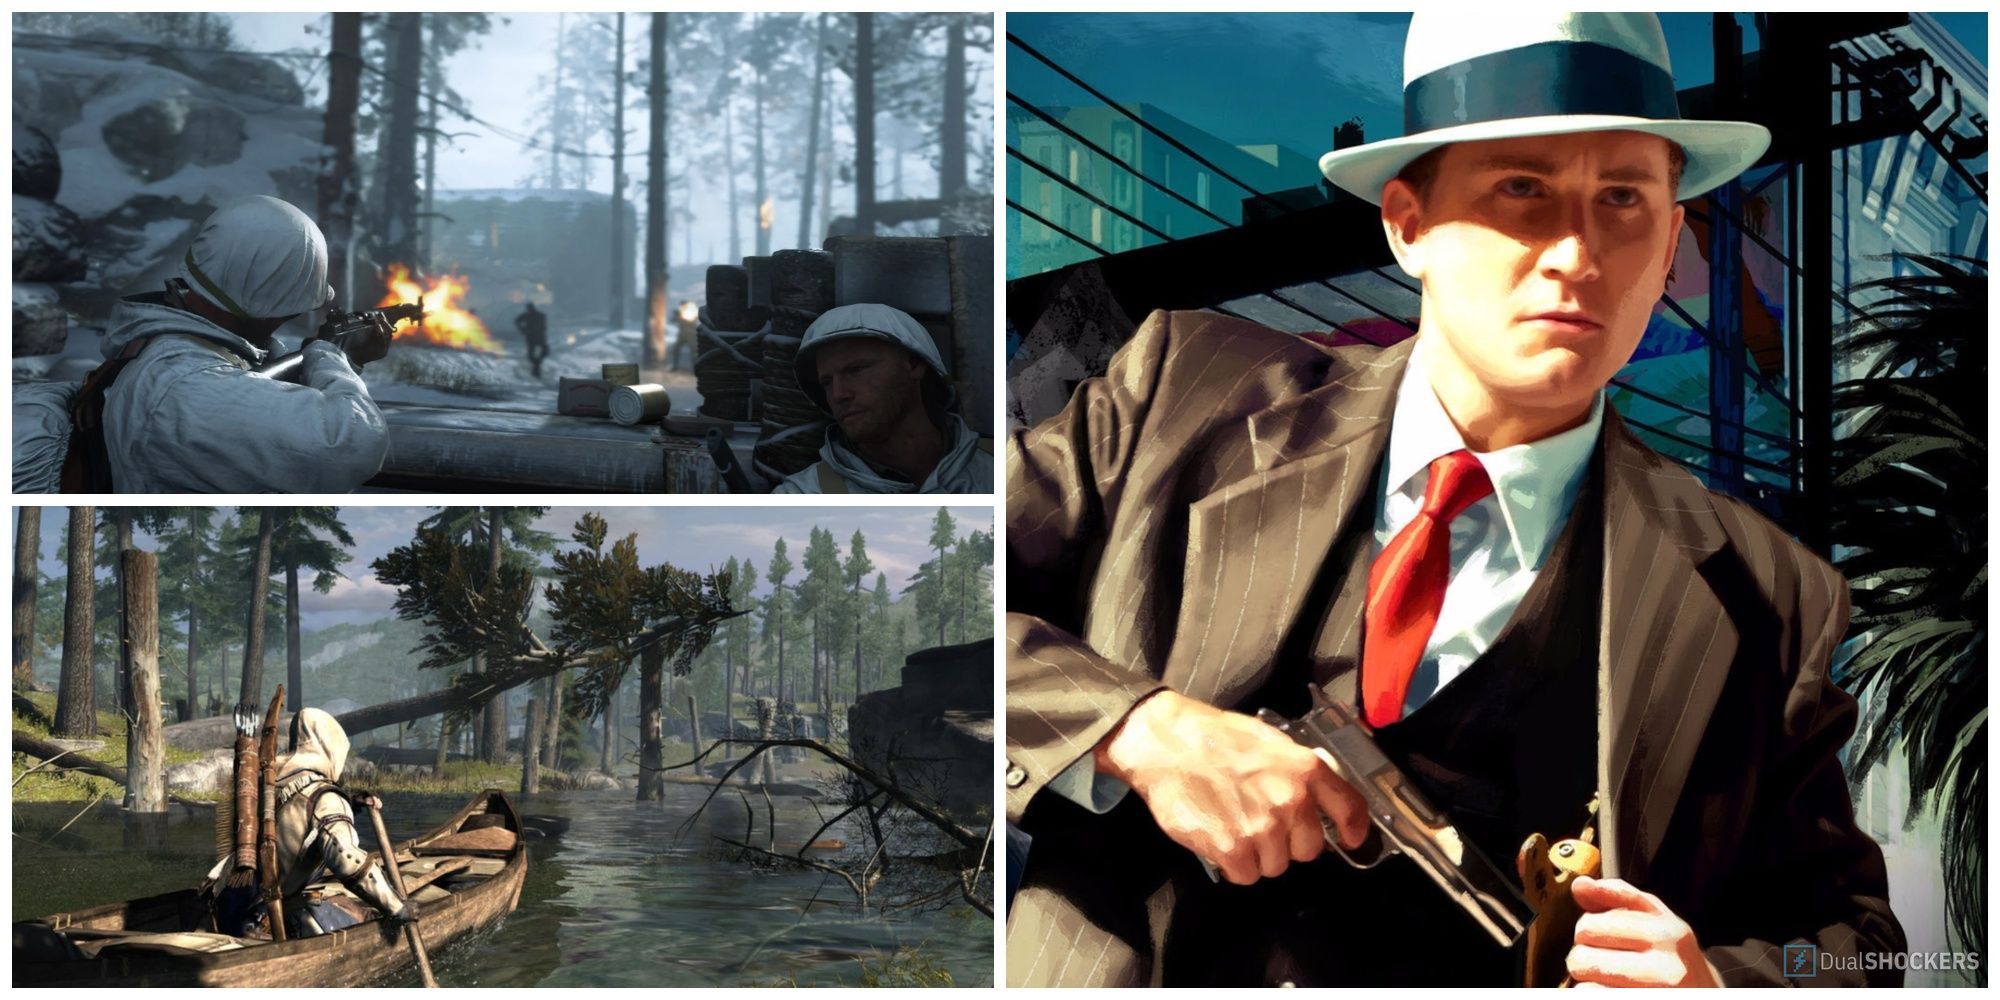 Screengrabs from Call of duty, Assassin's creed III, and L.A Noire